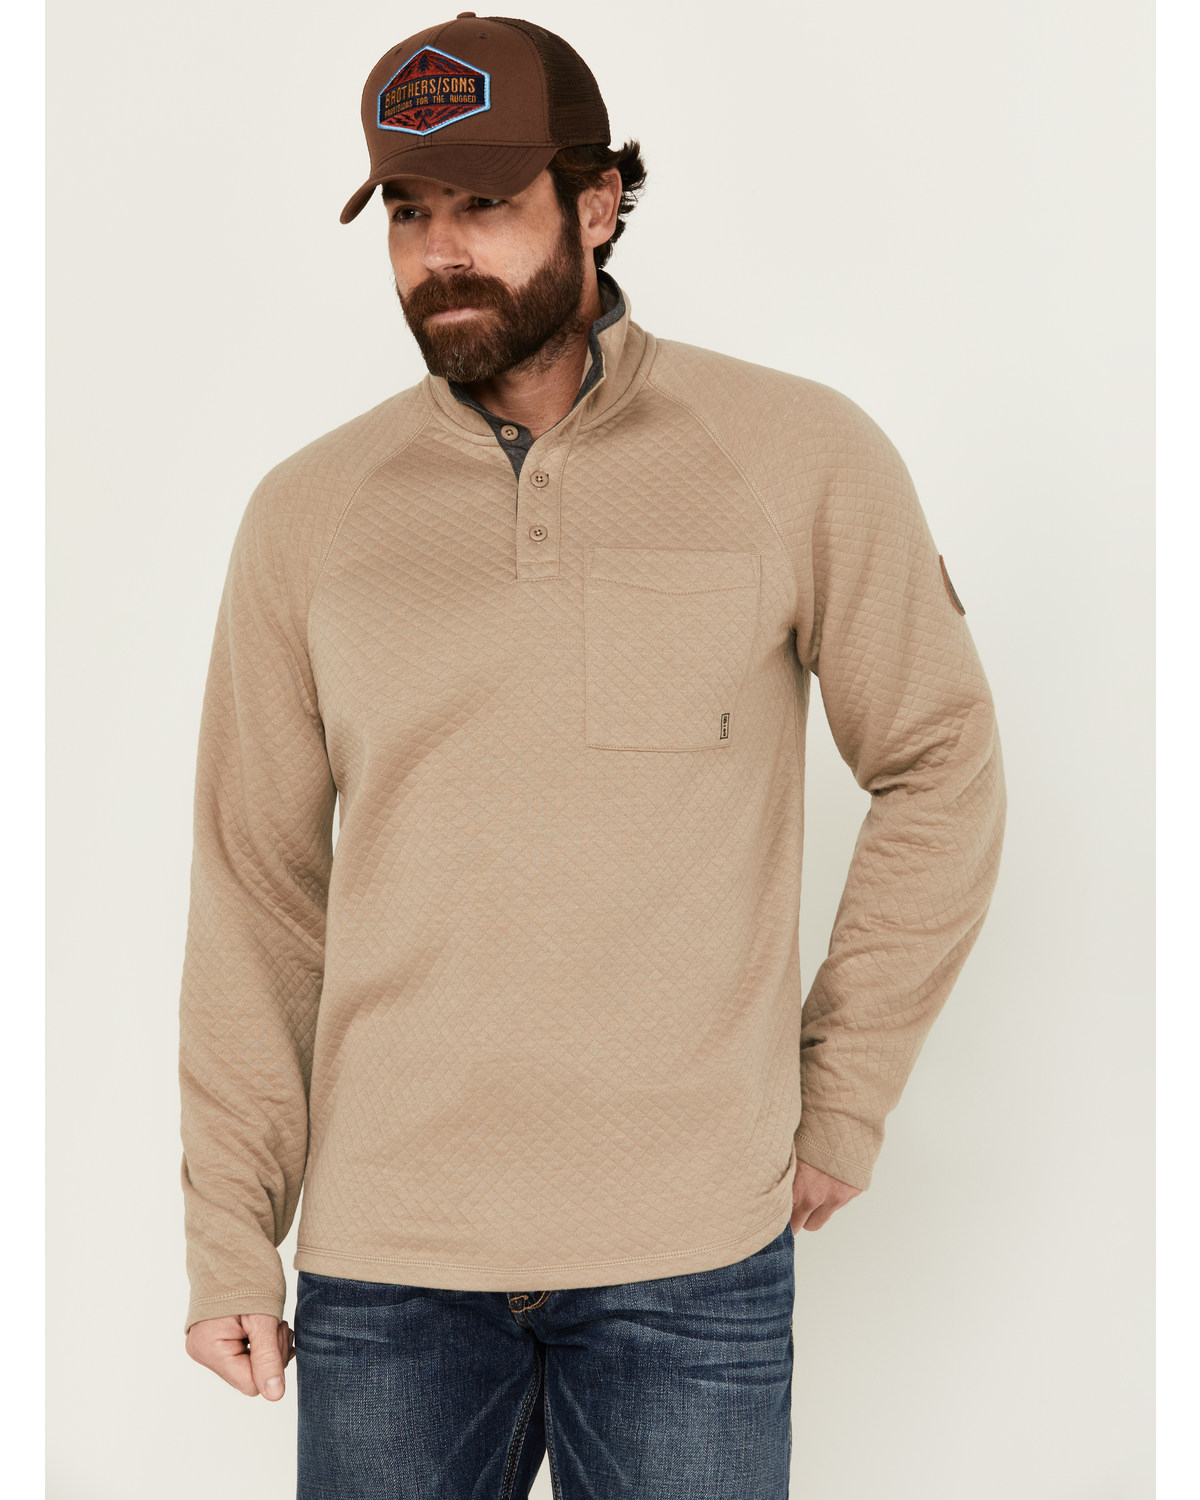 Brothers and Sons Men's Uinta Quilted Pullover